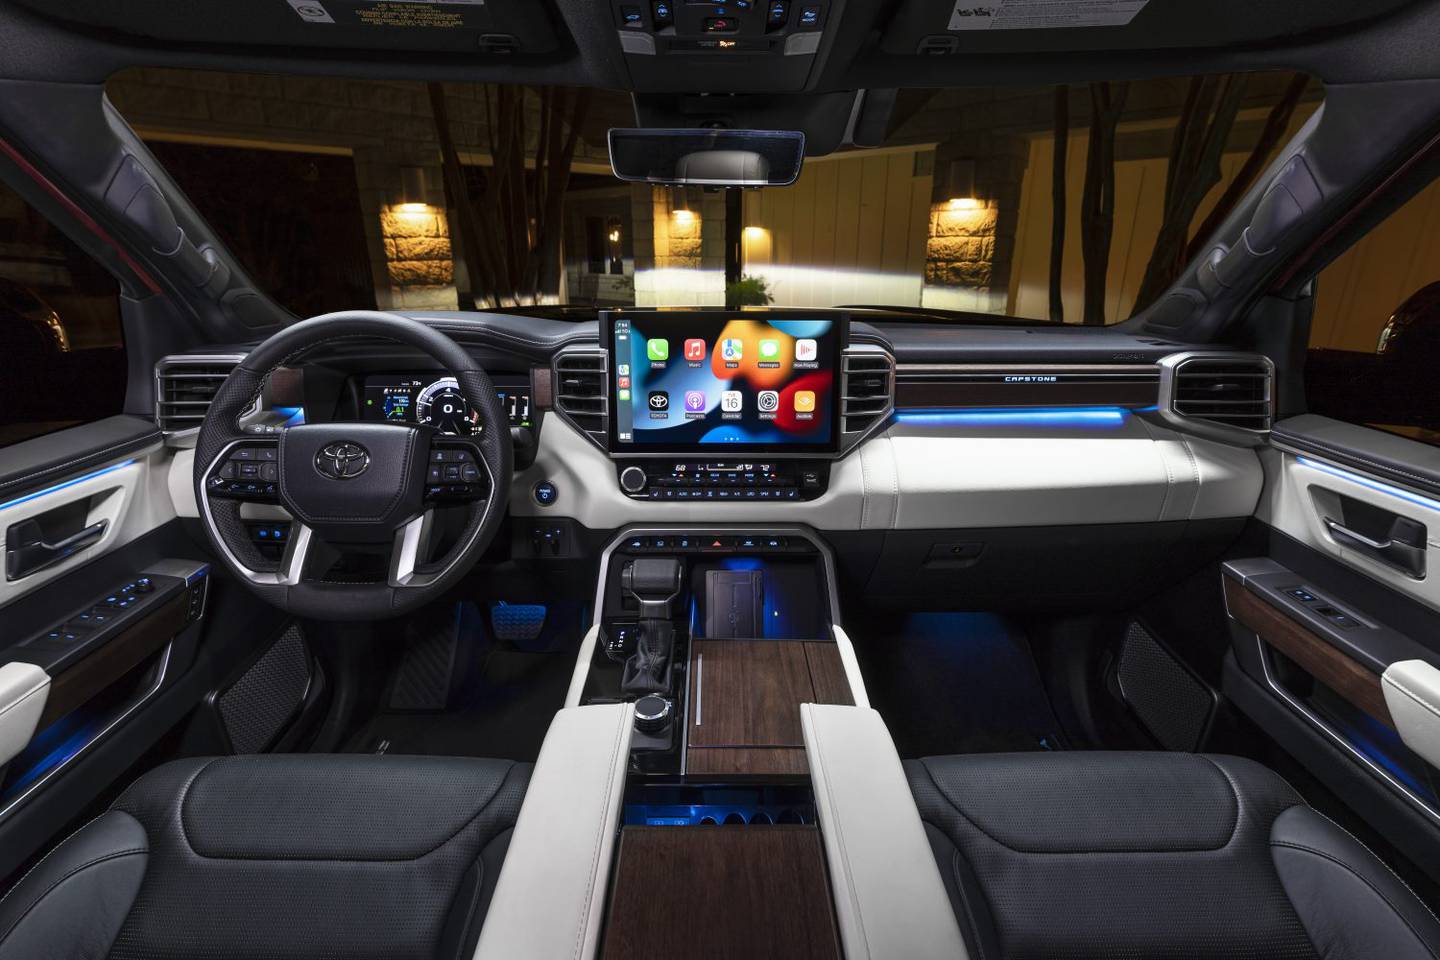 The Sequoia's interior features leather-trimmed seating, a 14-inch touchscreen, a head-up display and panoramic sunroof options. Photo: Toyota